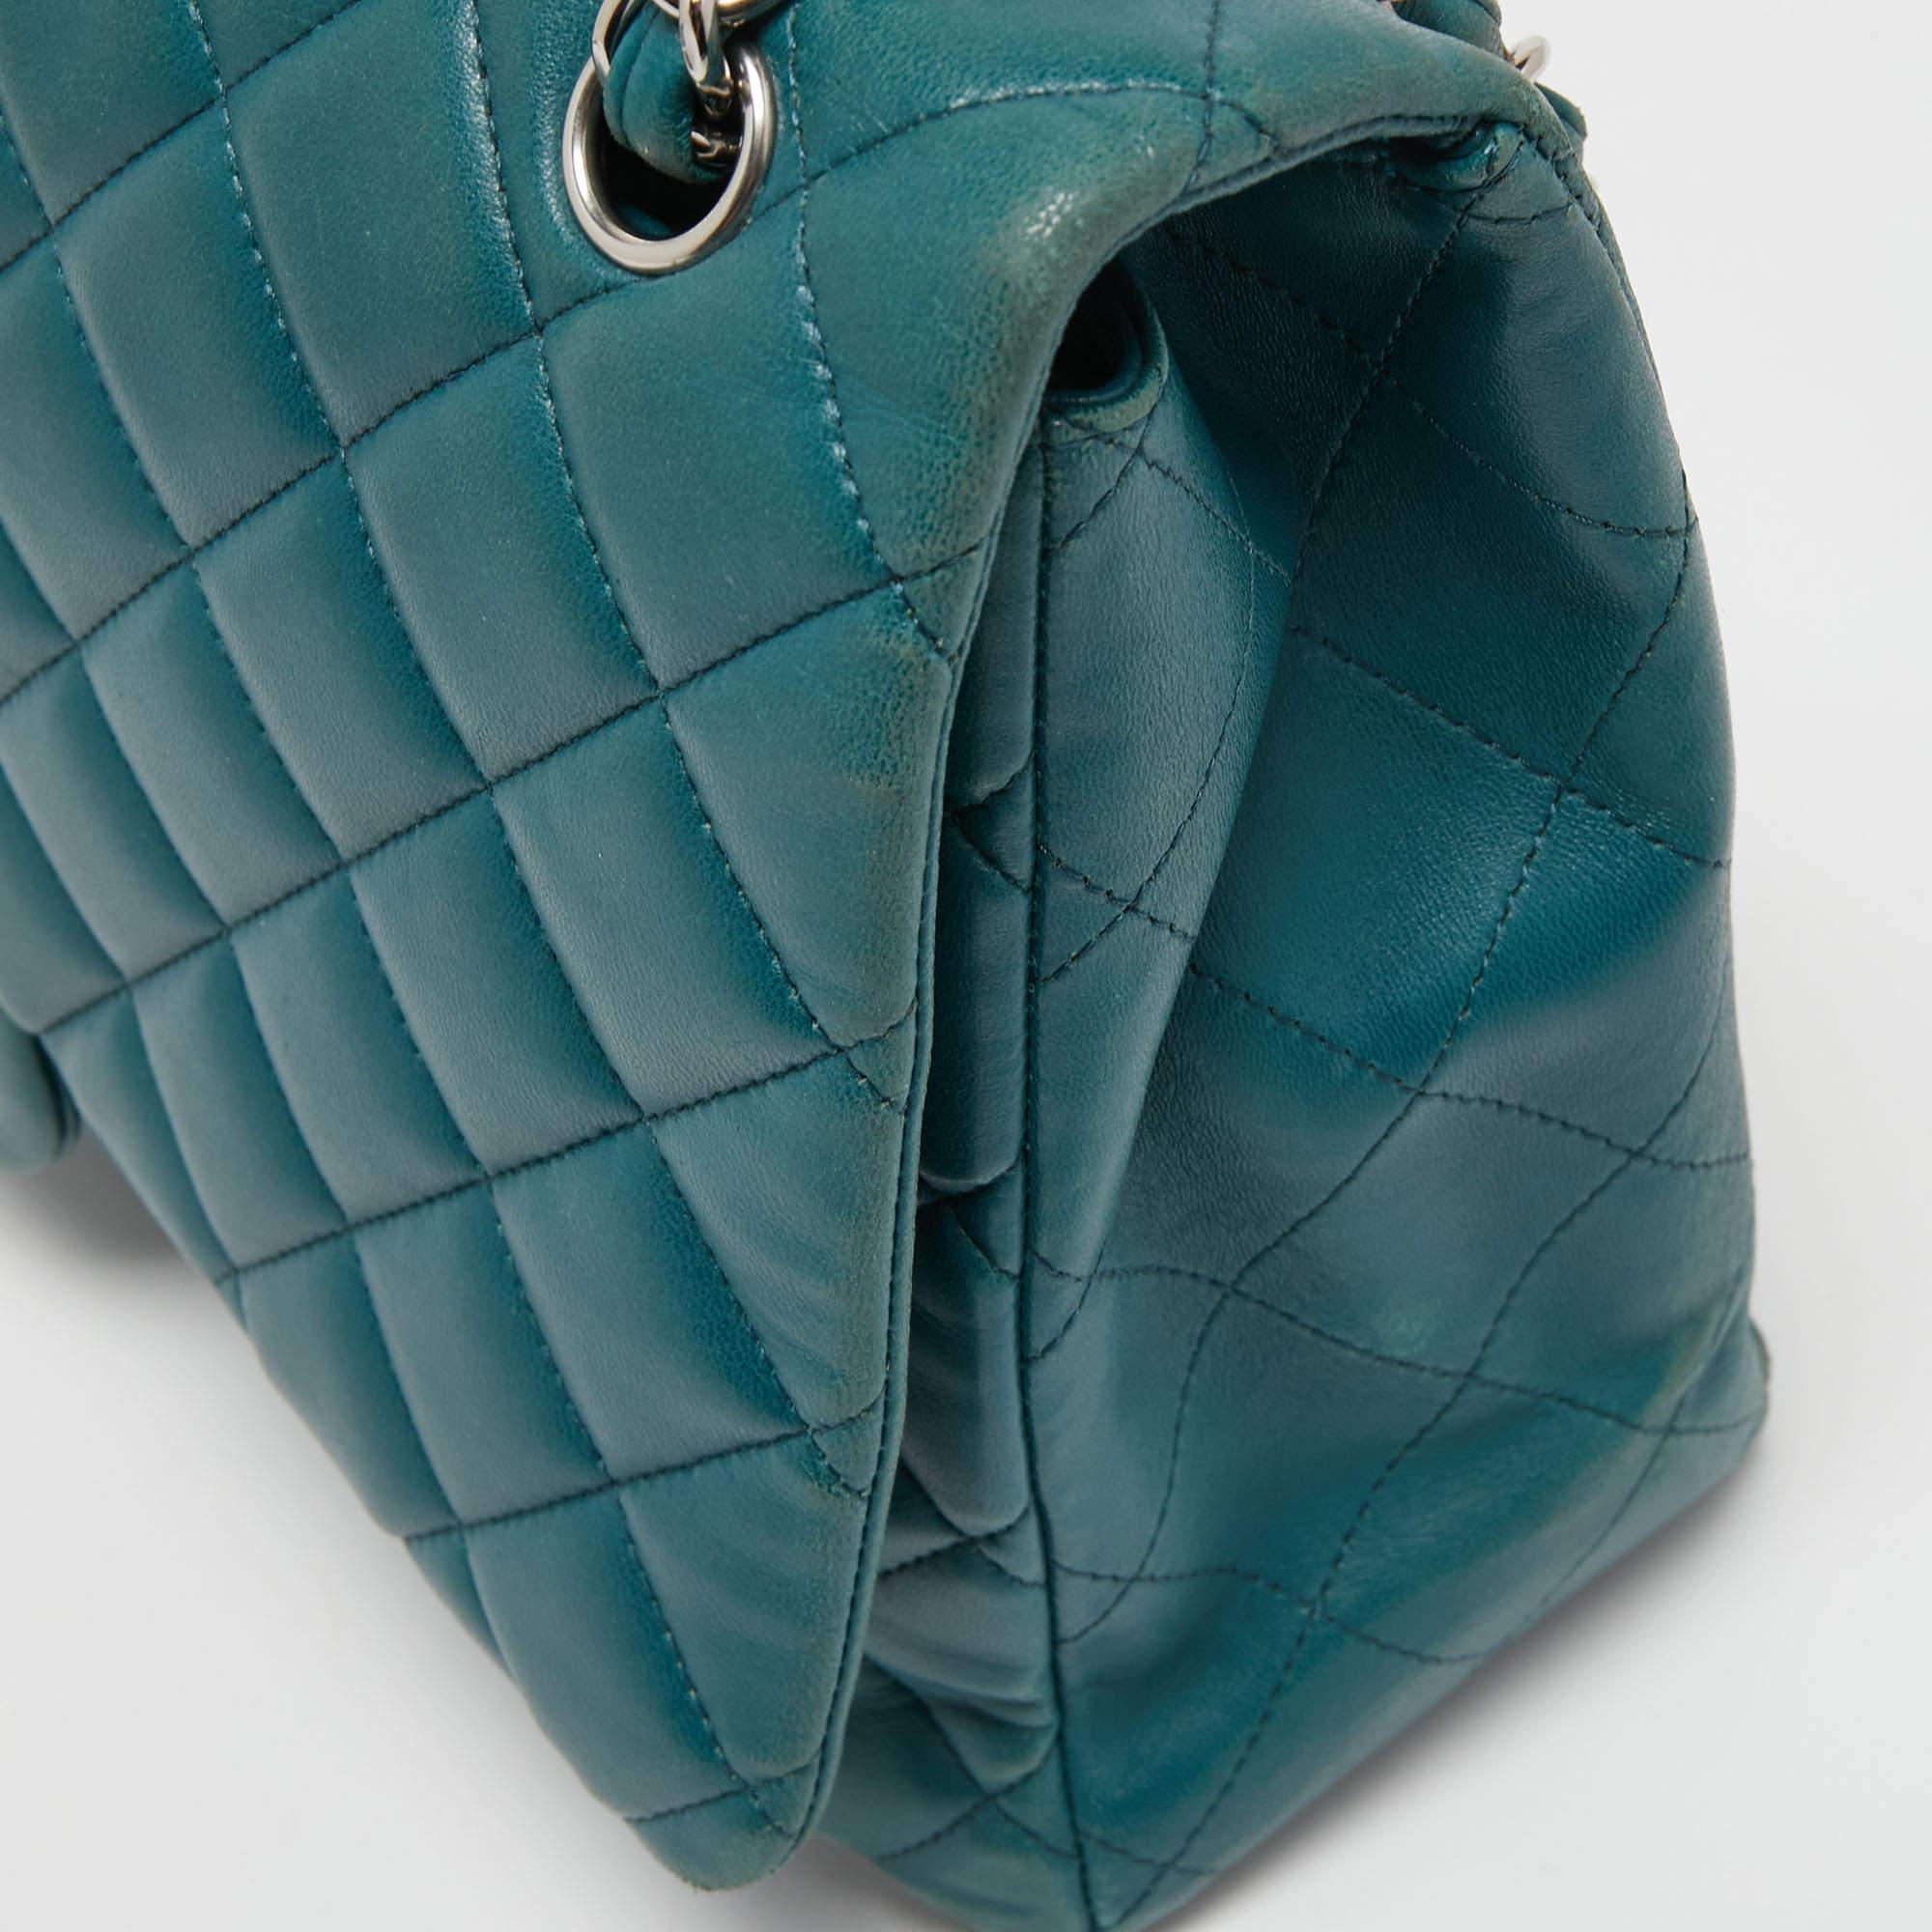 Chanel Teal Blue Quilted Leather Maxi Classic Single Flap Shoulder Bag 9